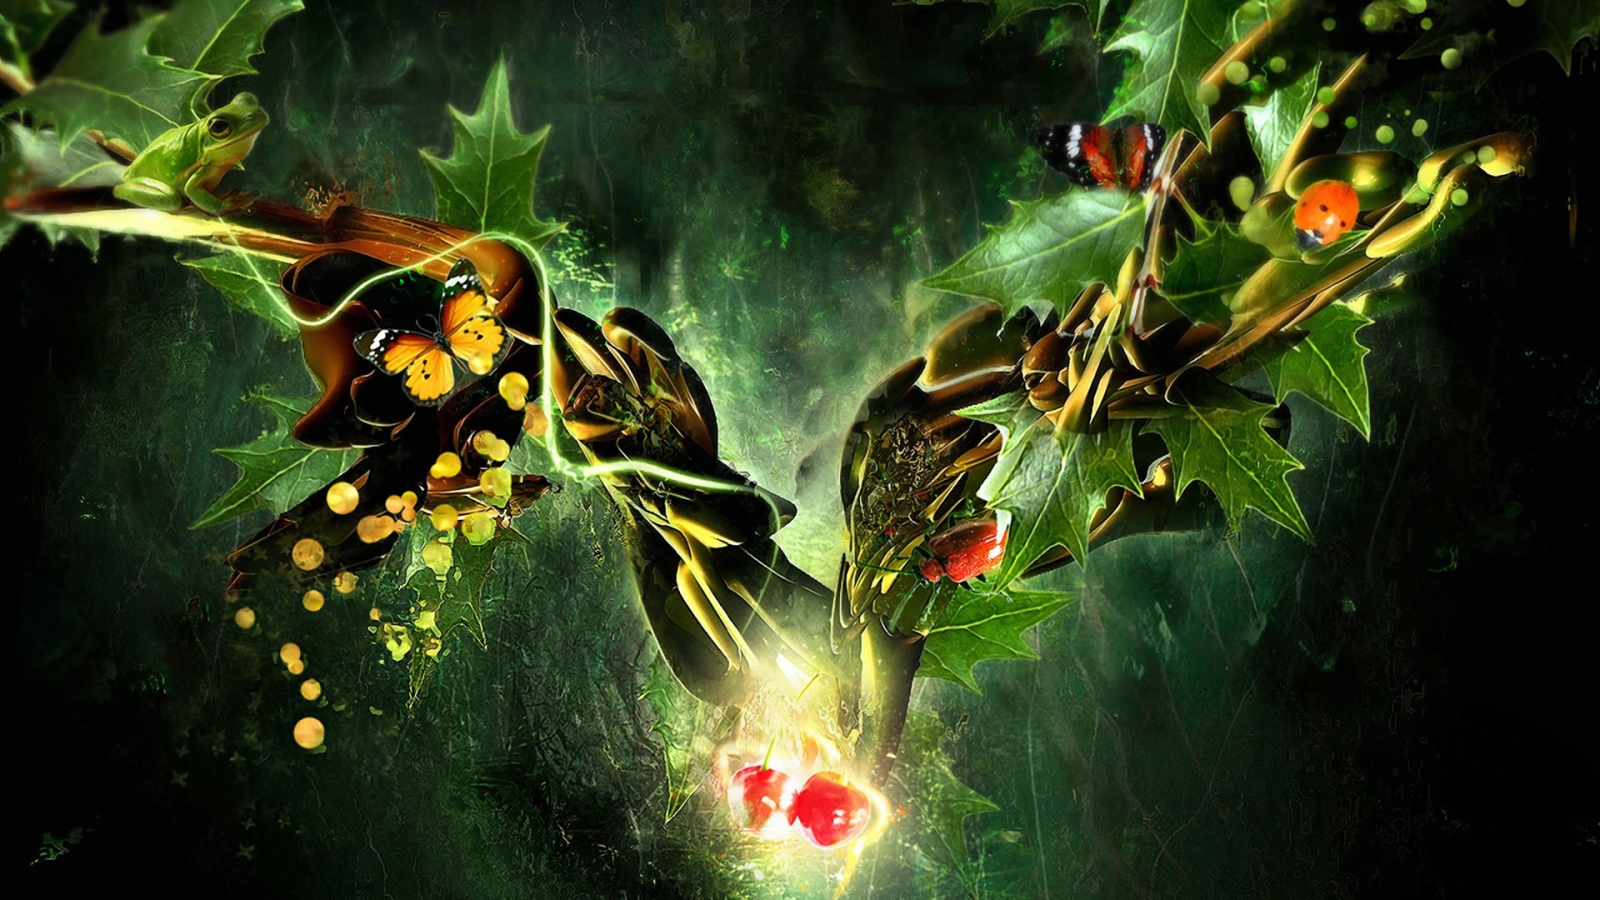 Butterfly, Ladybug, Frog in a Fantasy World for 1600 x 900 HDTV resolution